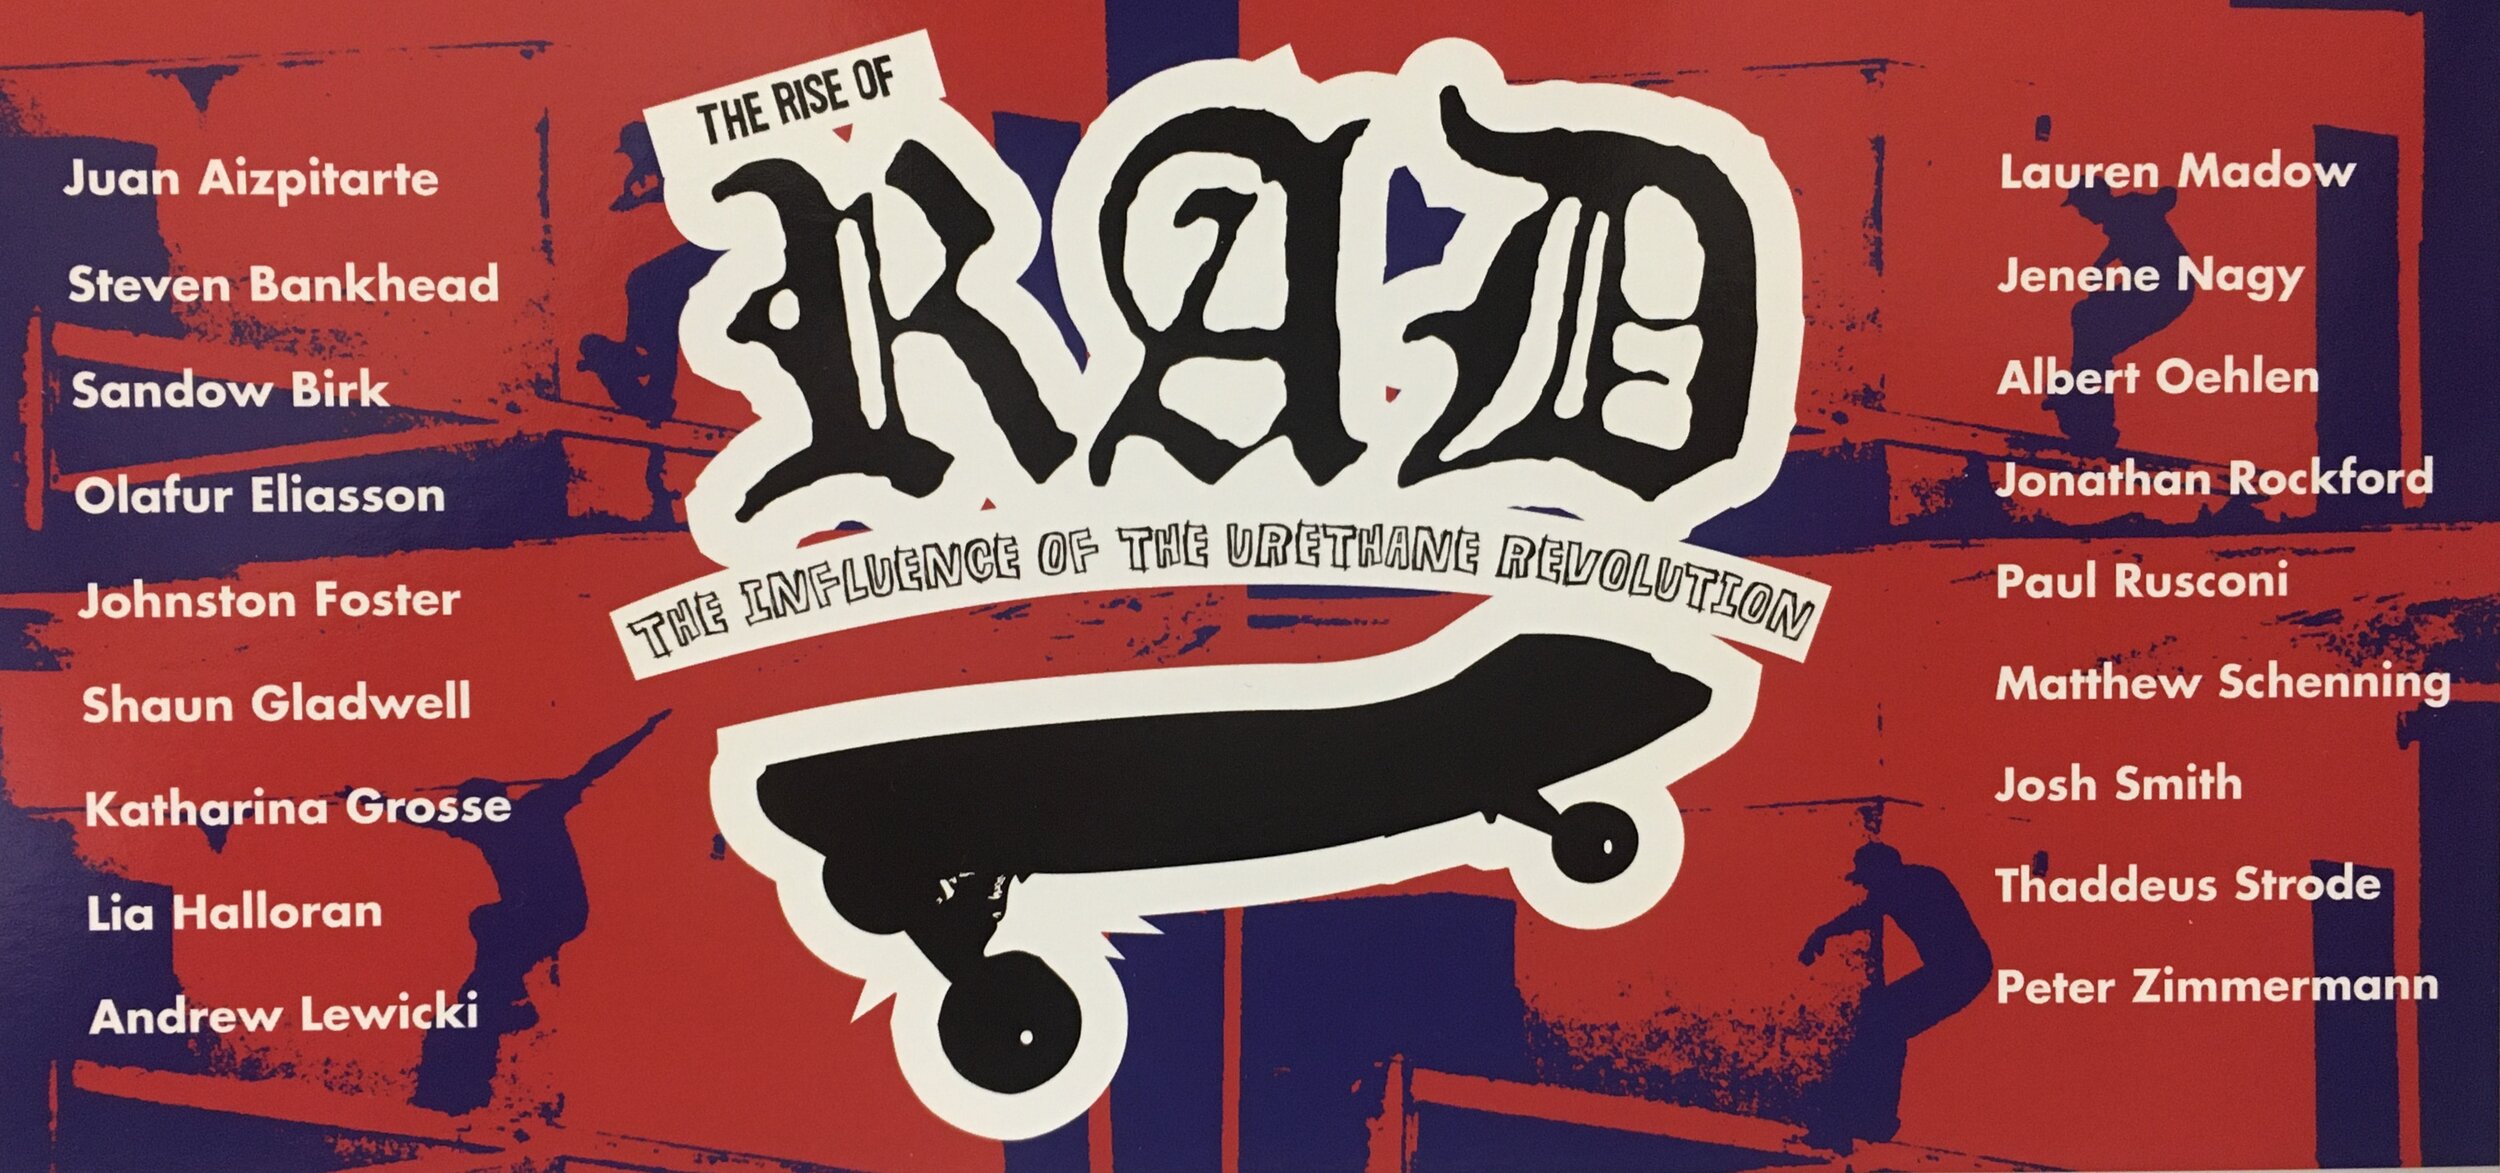 THE RISE OF RAD